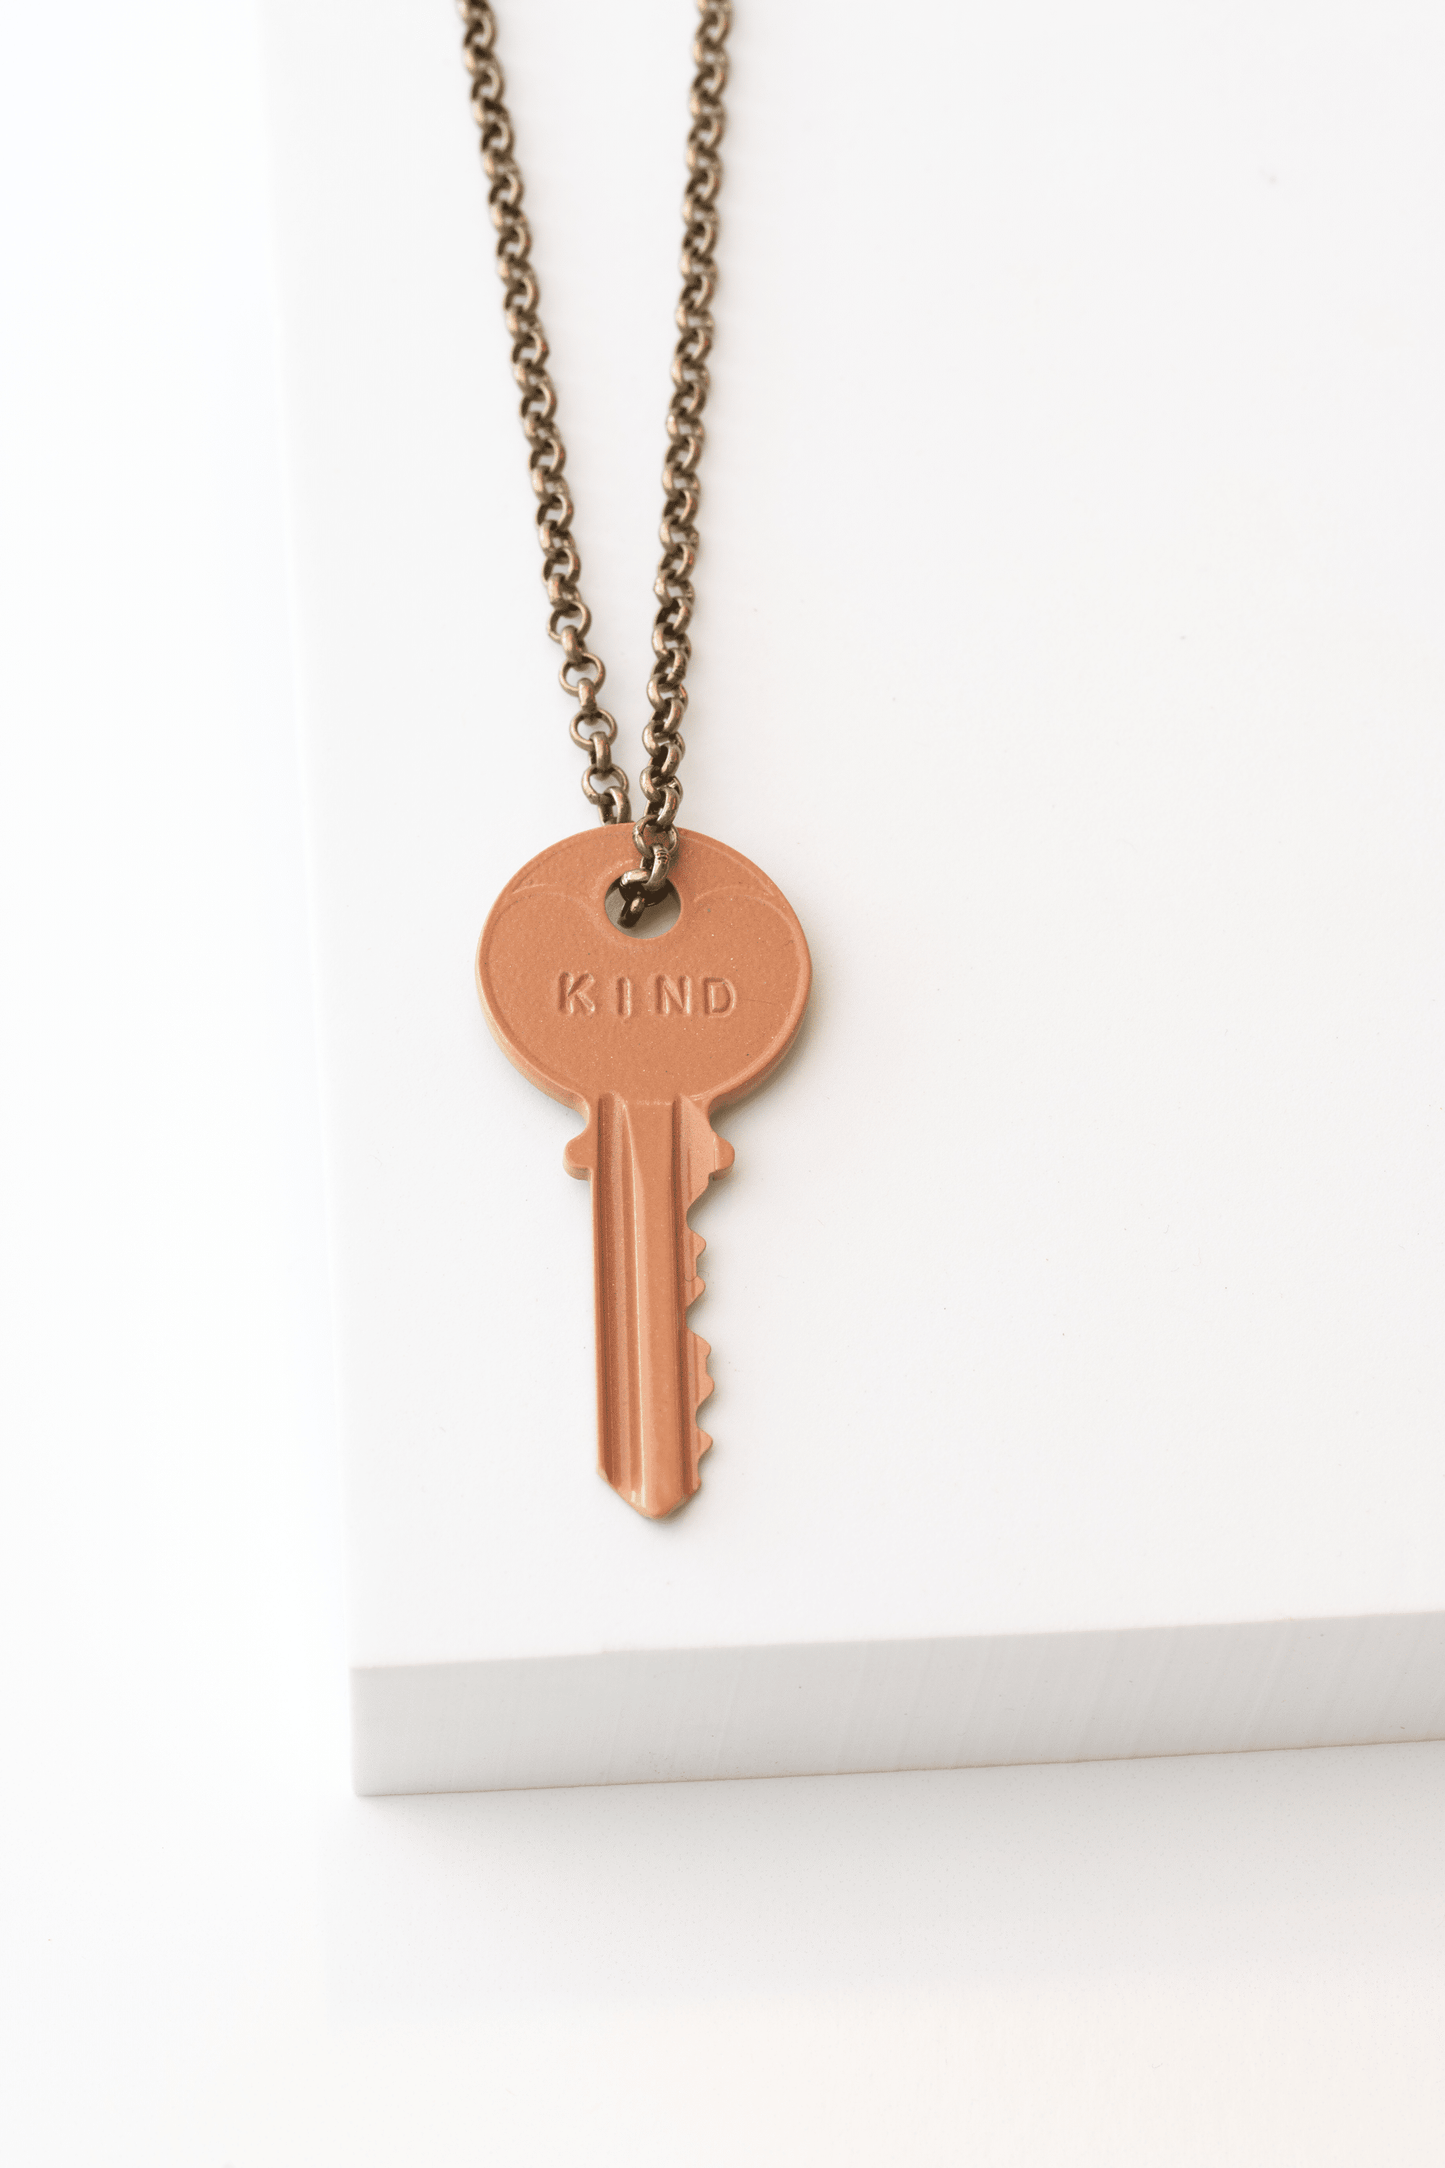 Peach Fuzz Classic Key Necklace Necklaces The Giving Keys Gold 